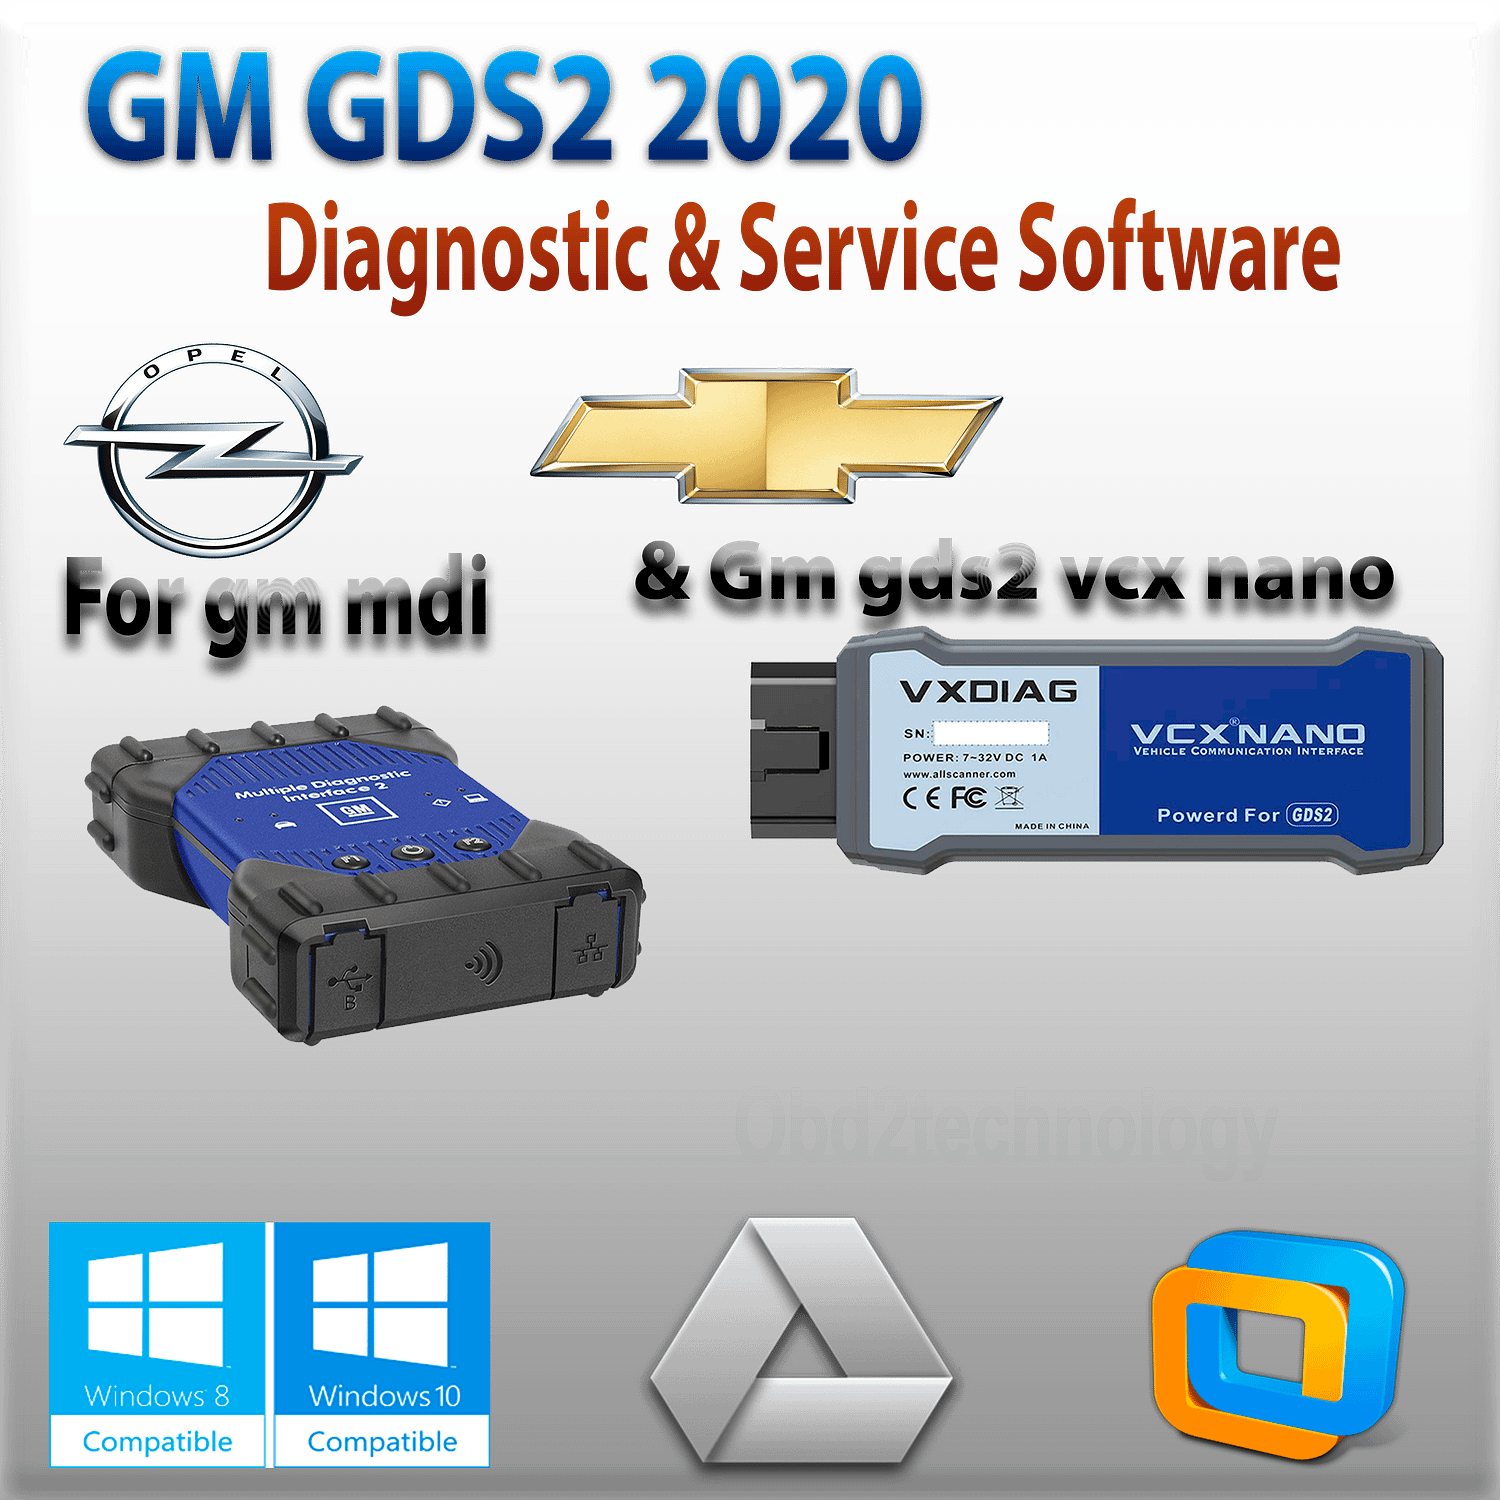 diagnostic software gm gds2 2020 vauxhall opel/saab/chevrolet instant download